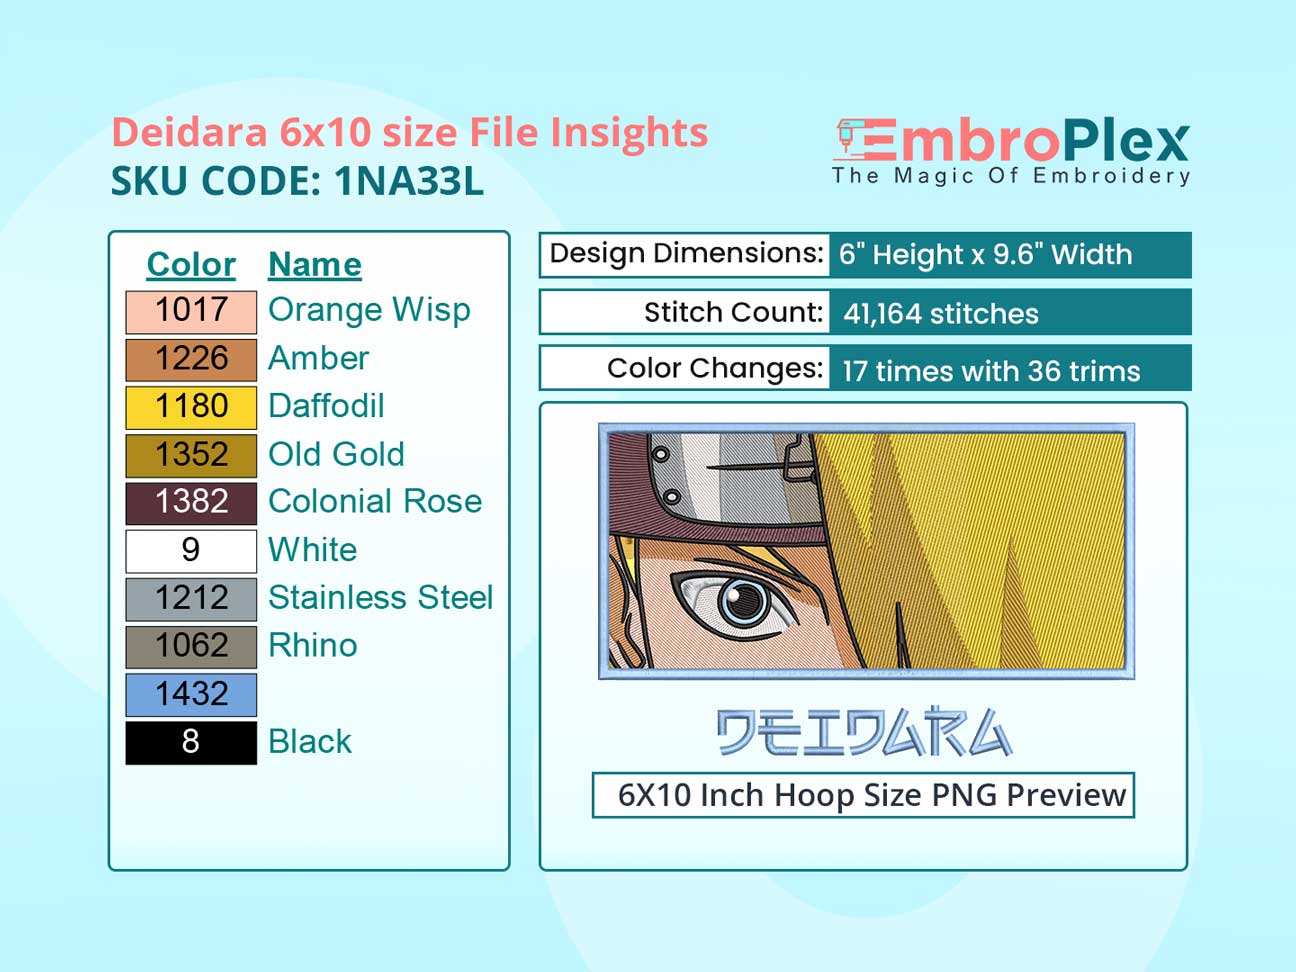 Anime-Inspired Deidara Embroidery Design File - 6x10 Inch hoop Size Variation overview image